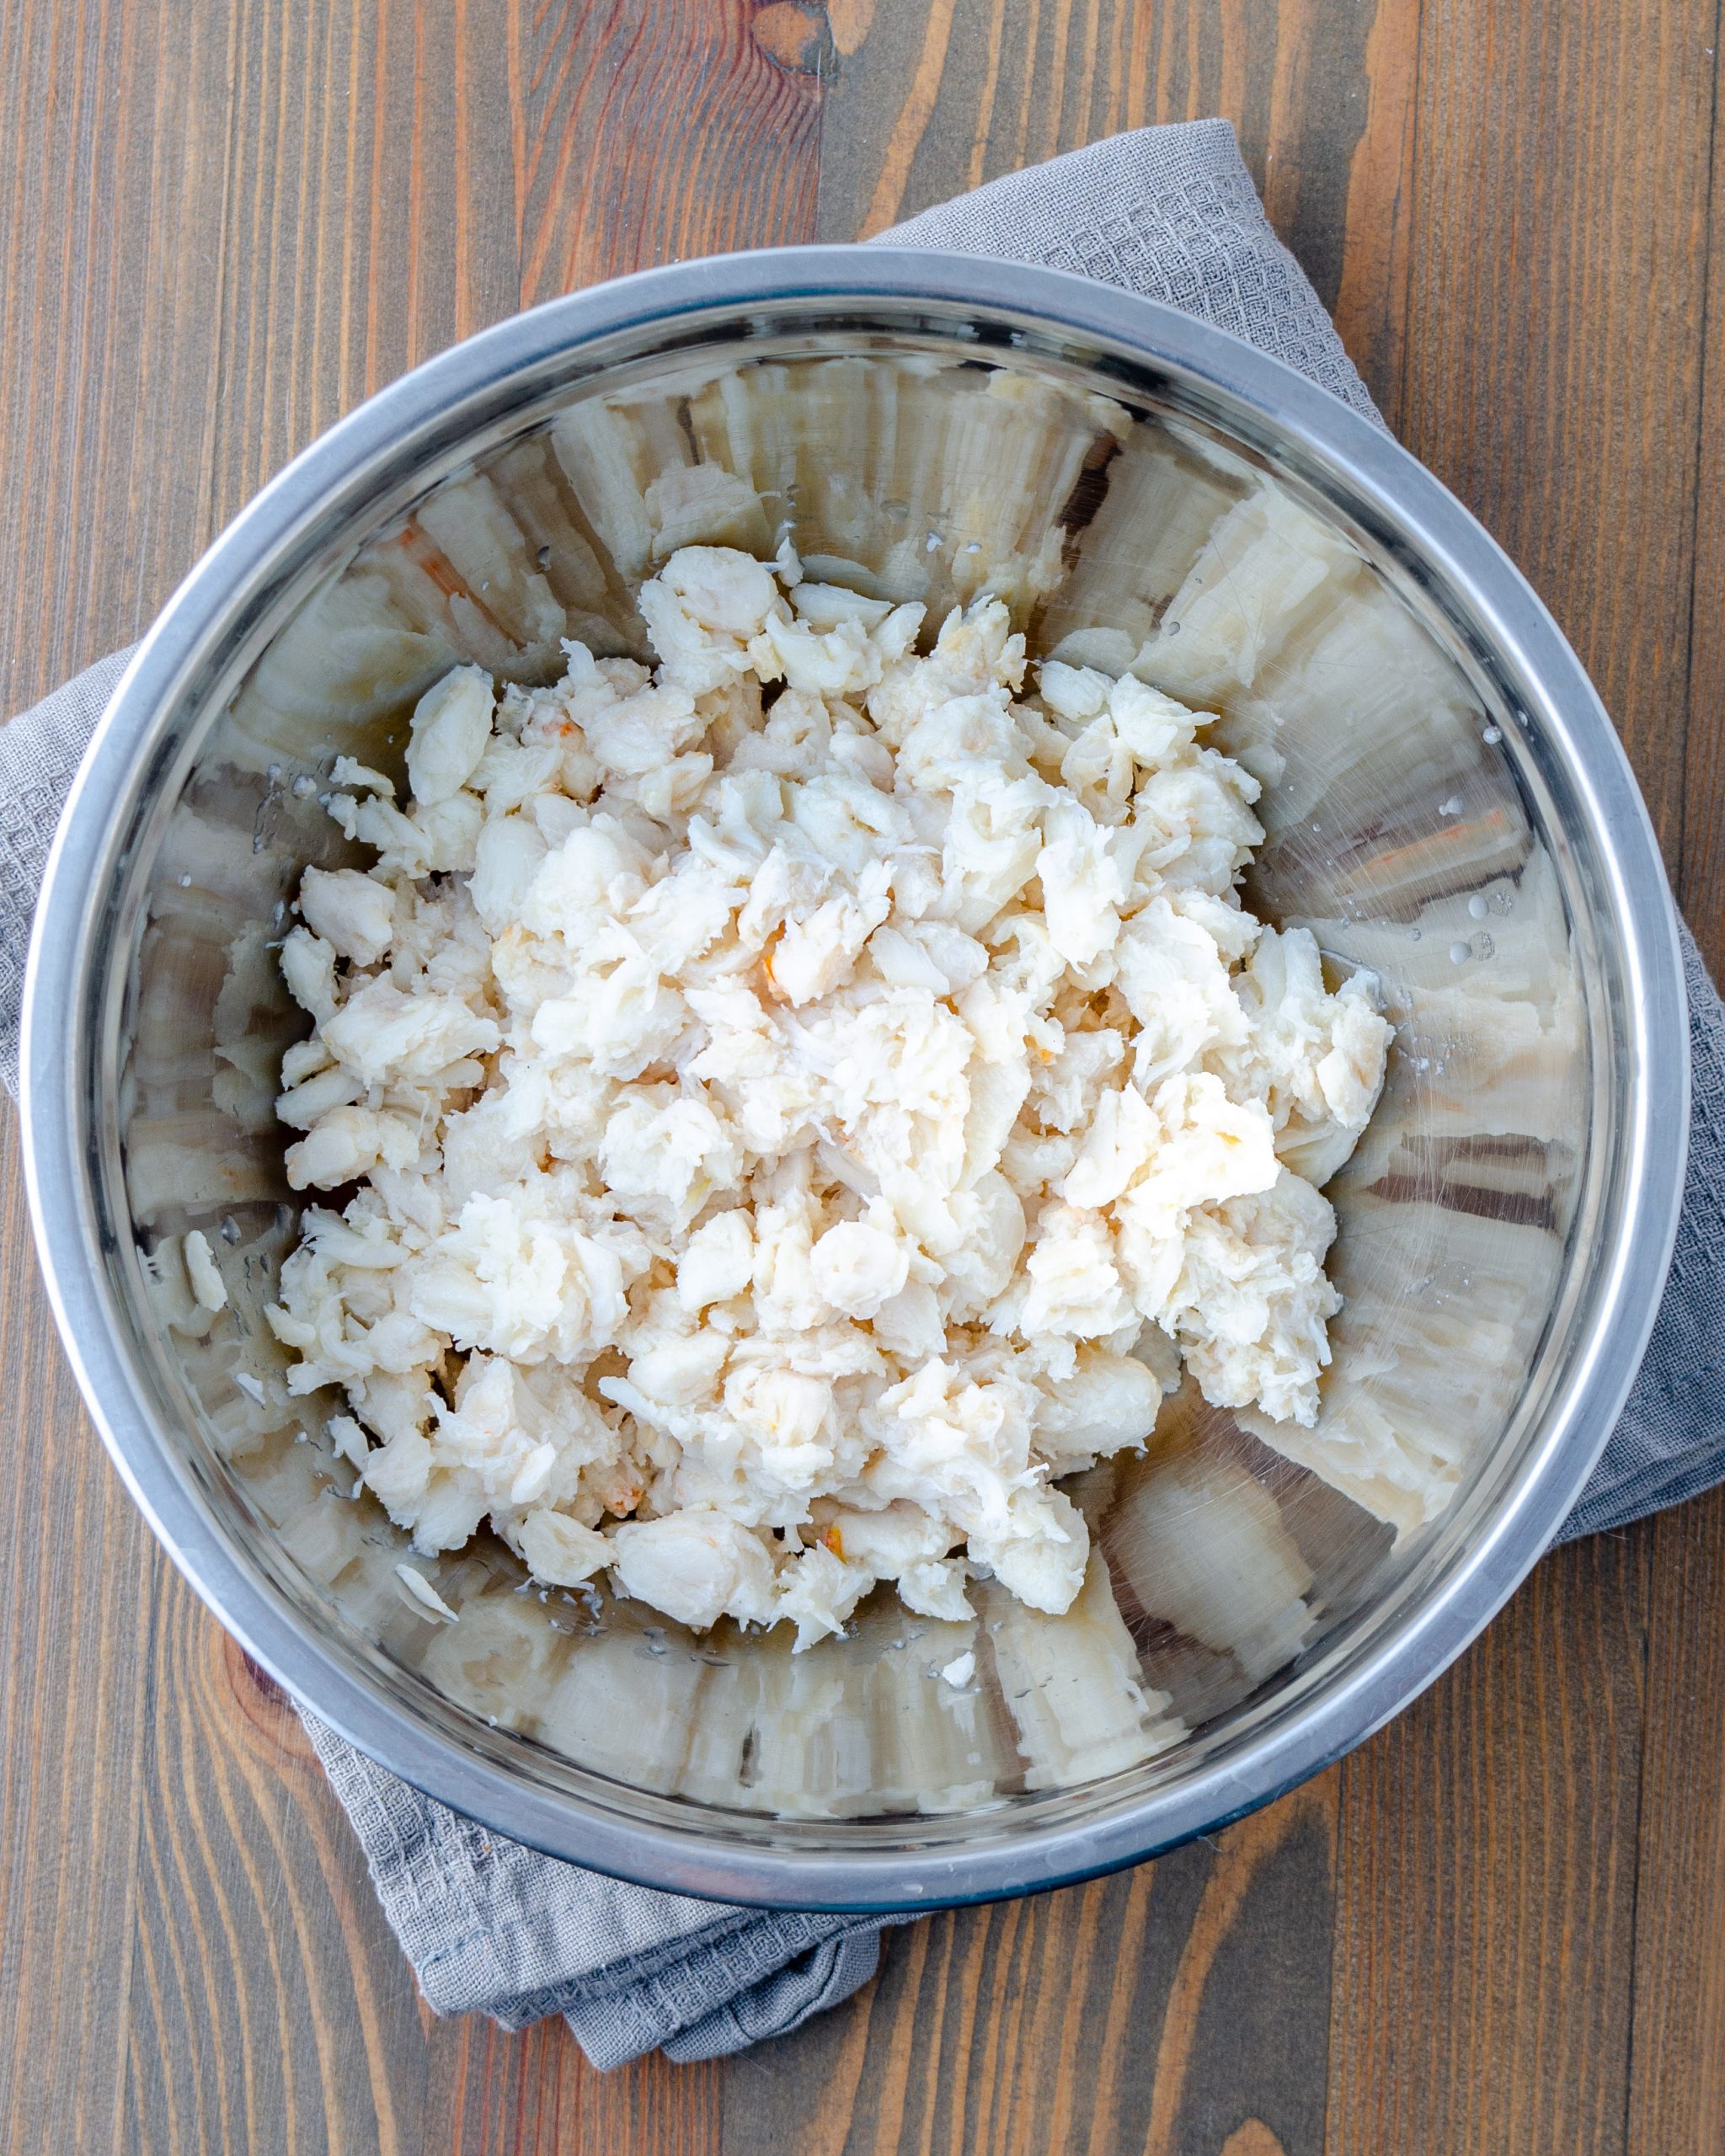 Start by adding the crab meat to a mixing bowl.